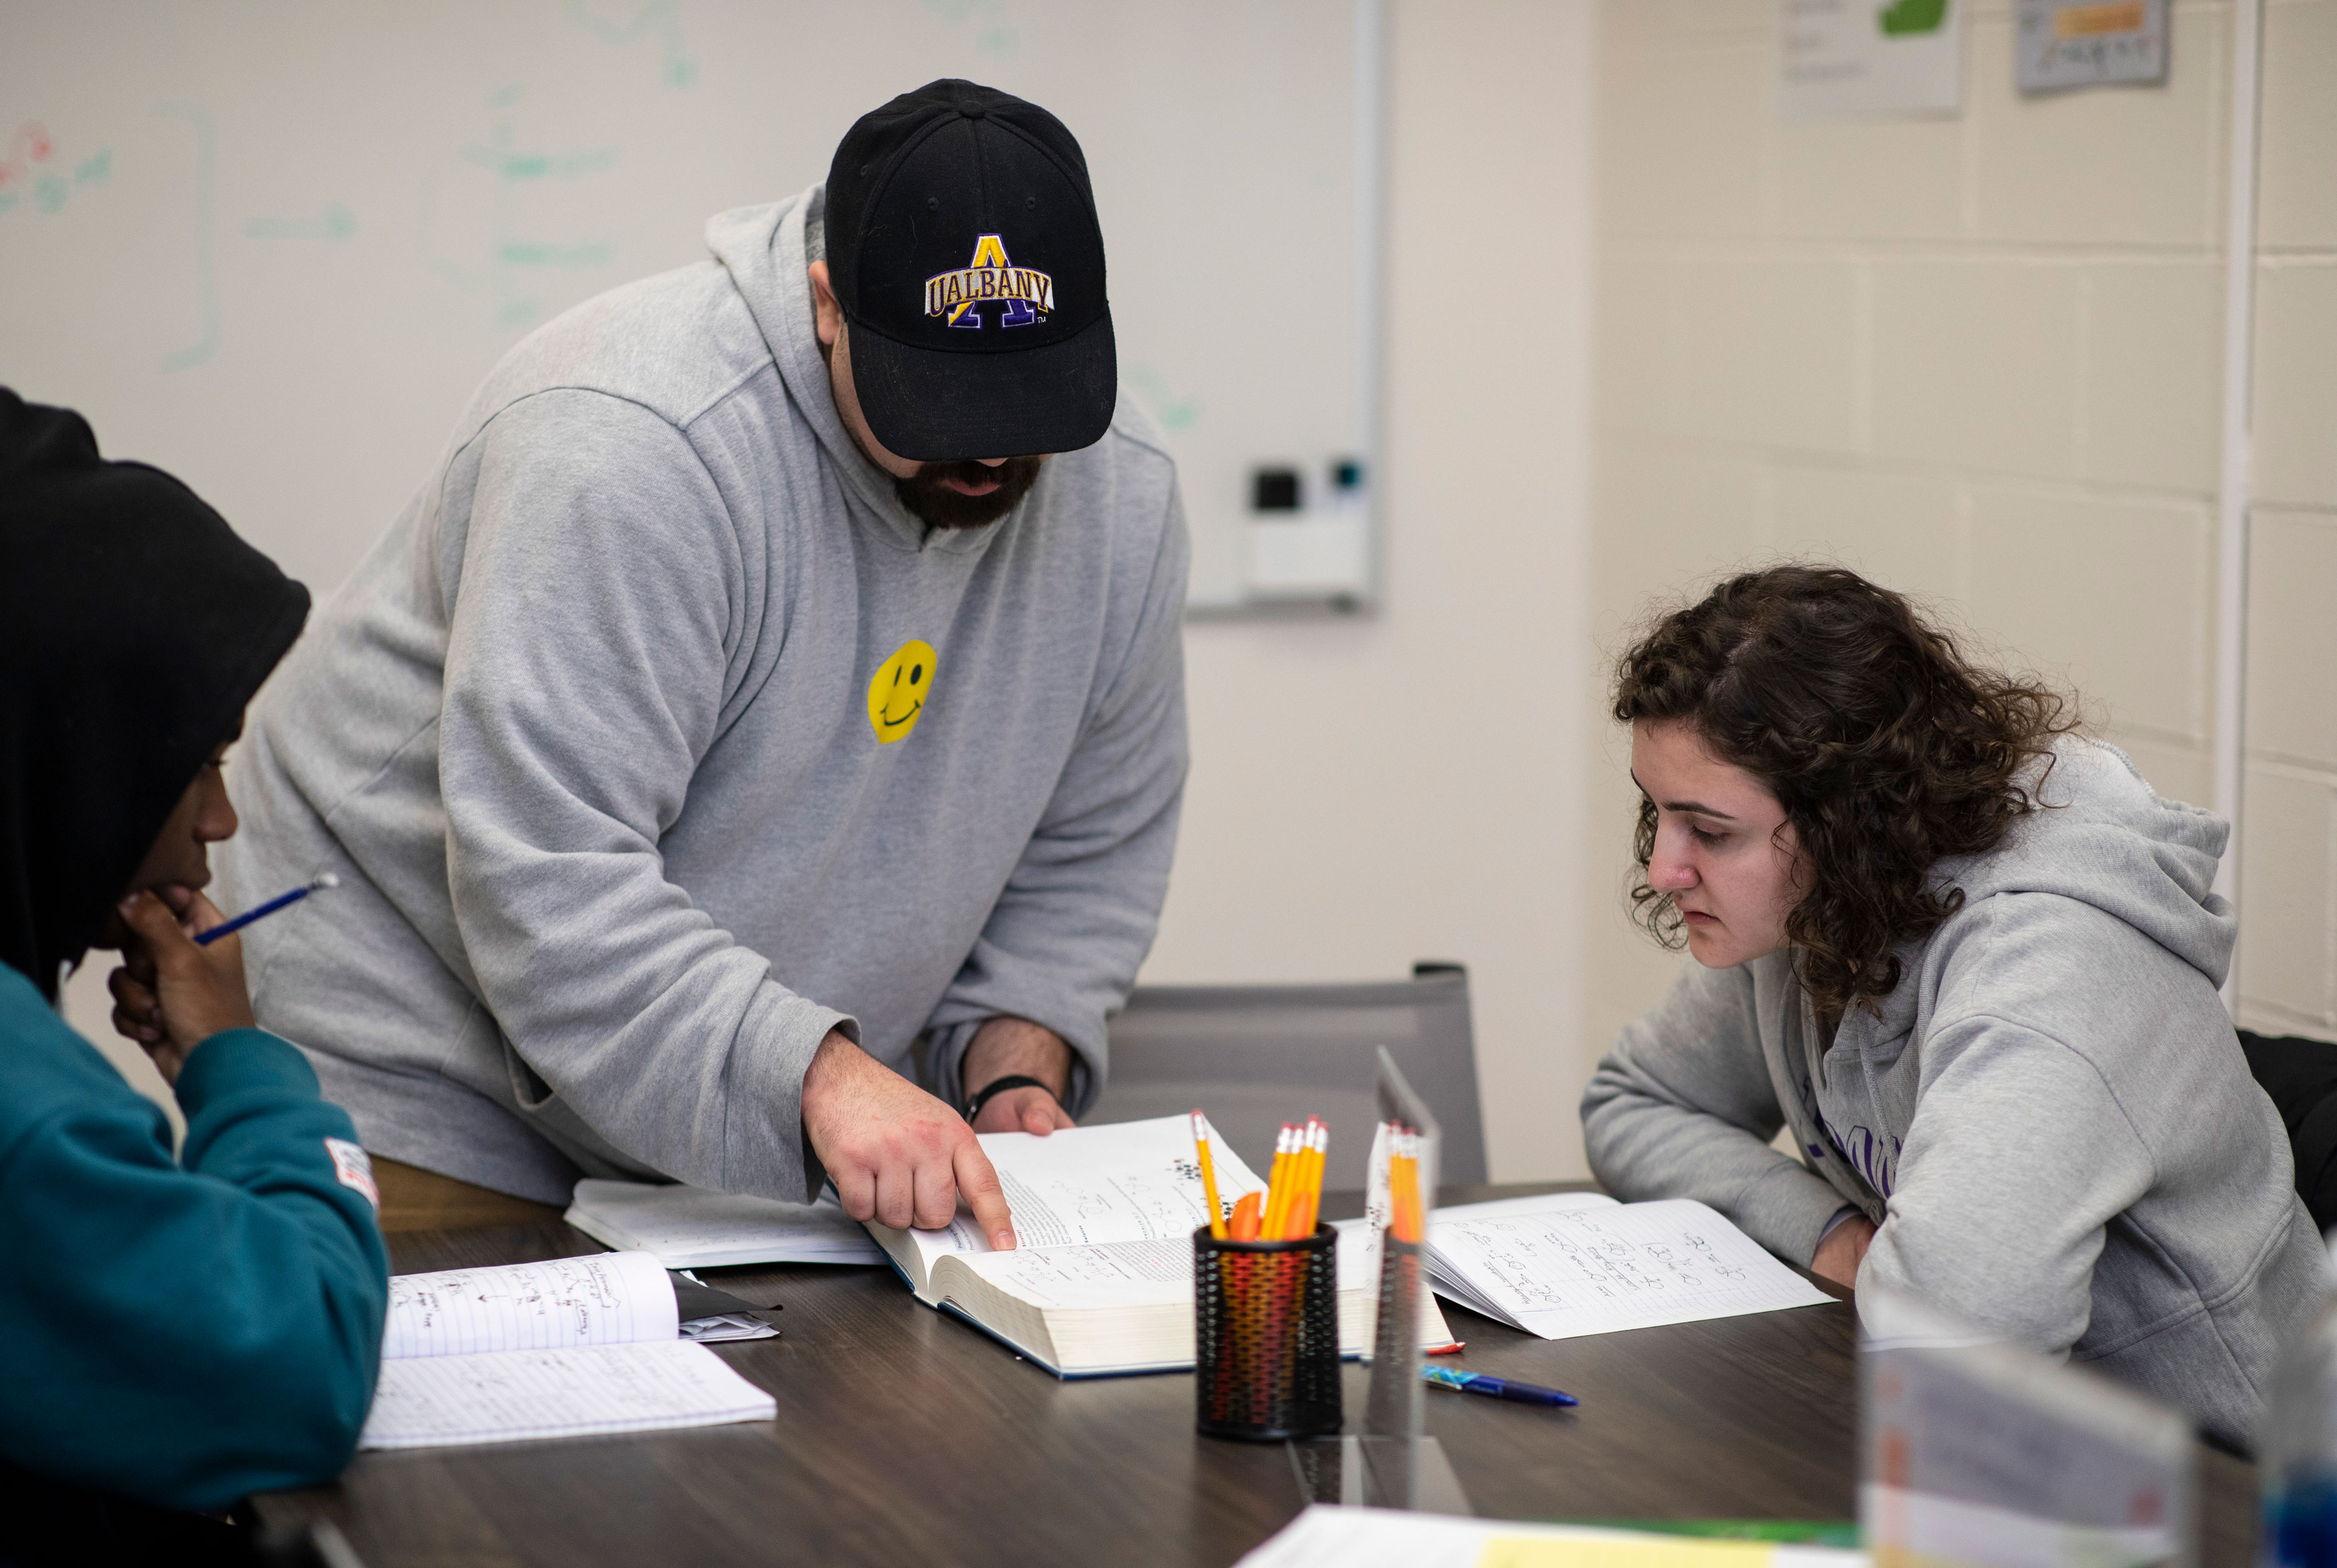 A CARSS tutor in a sweatshirt and baseball hat points to a line in a textbook as he leans over a table and two seated students look on.